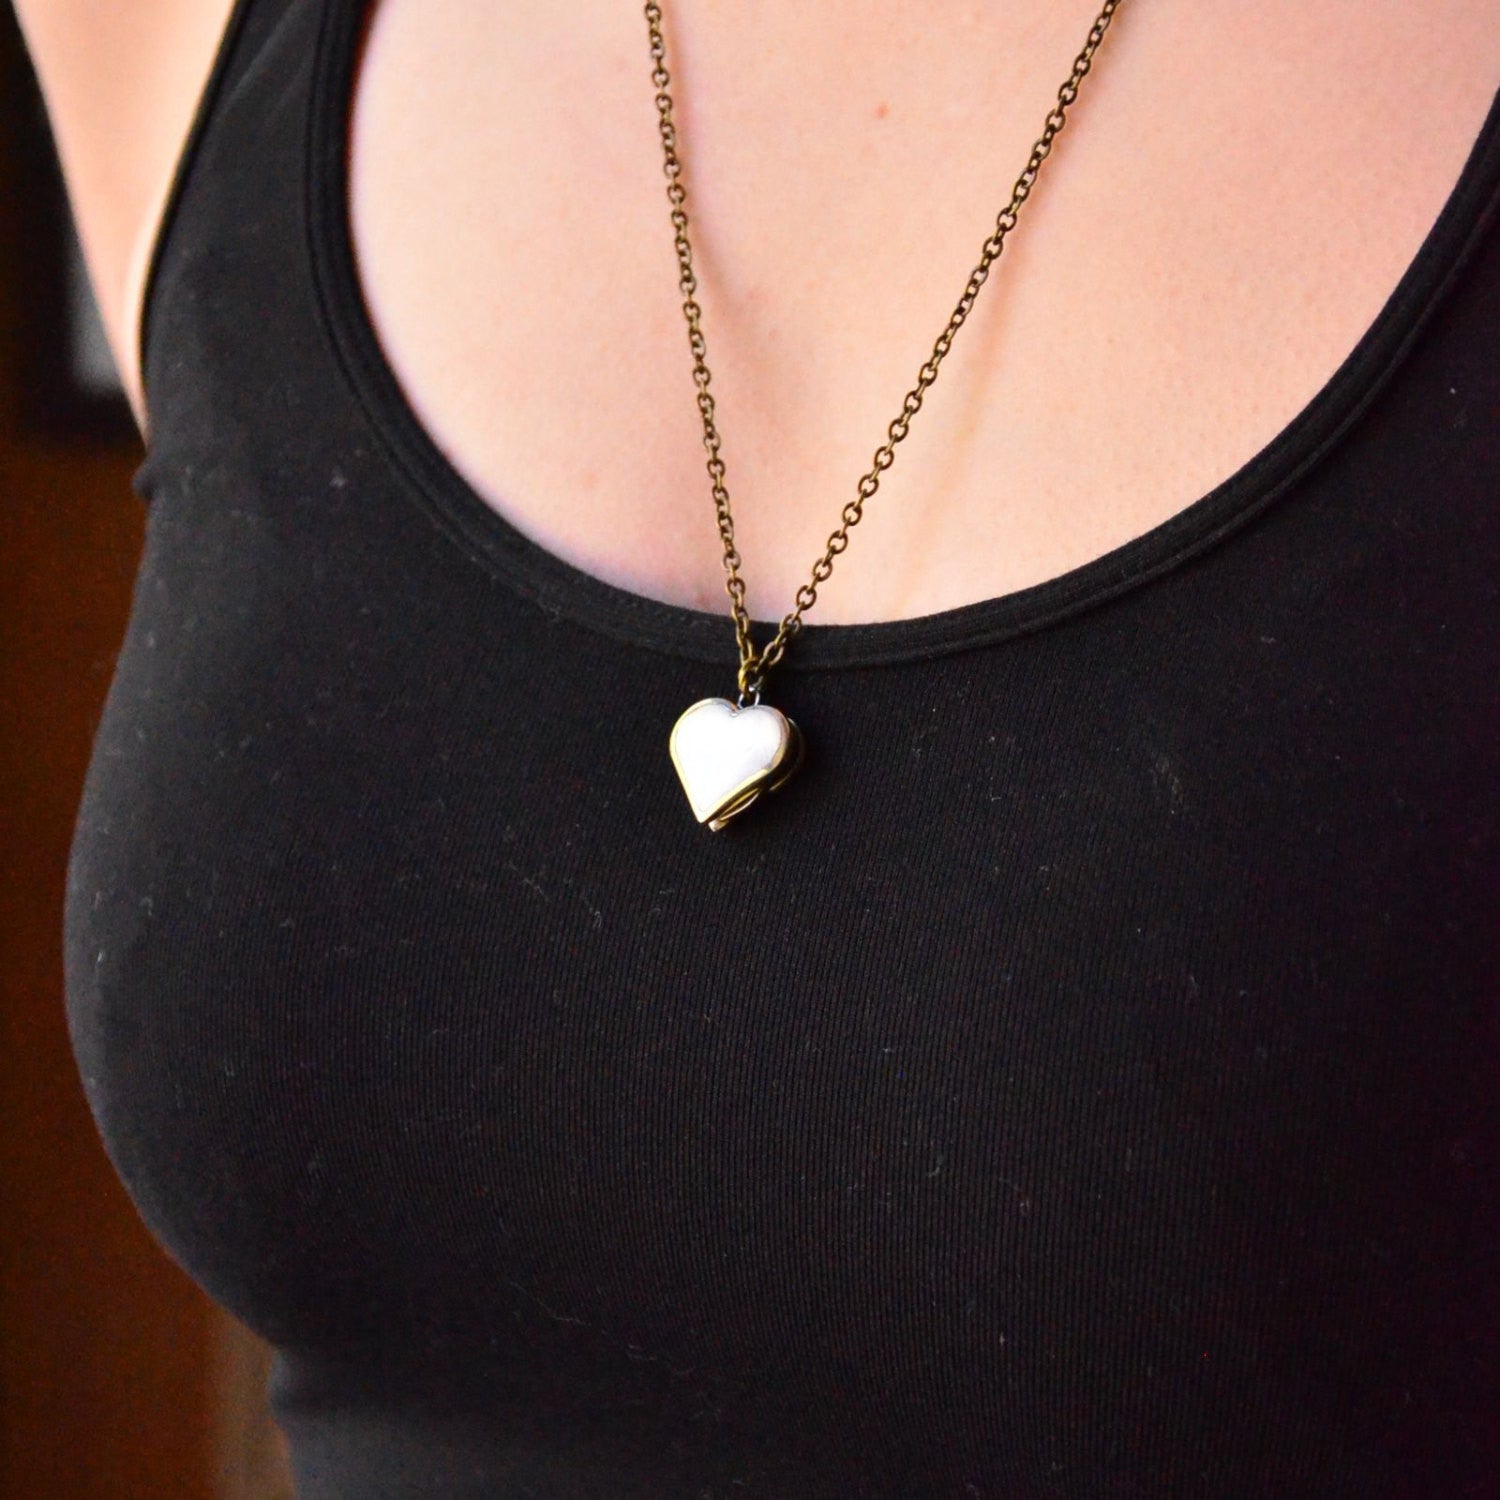 Tiny Secret Heart Double Knife Necklace - Gwen Delicious Jewelry Designs